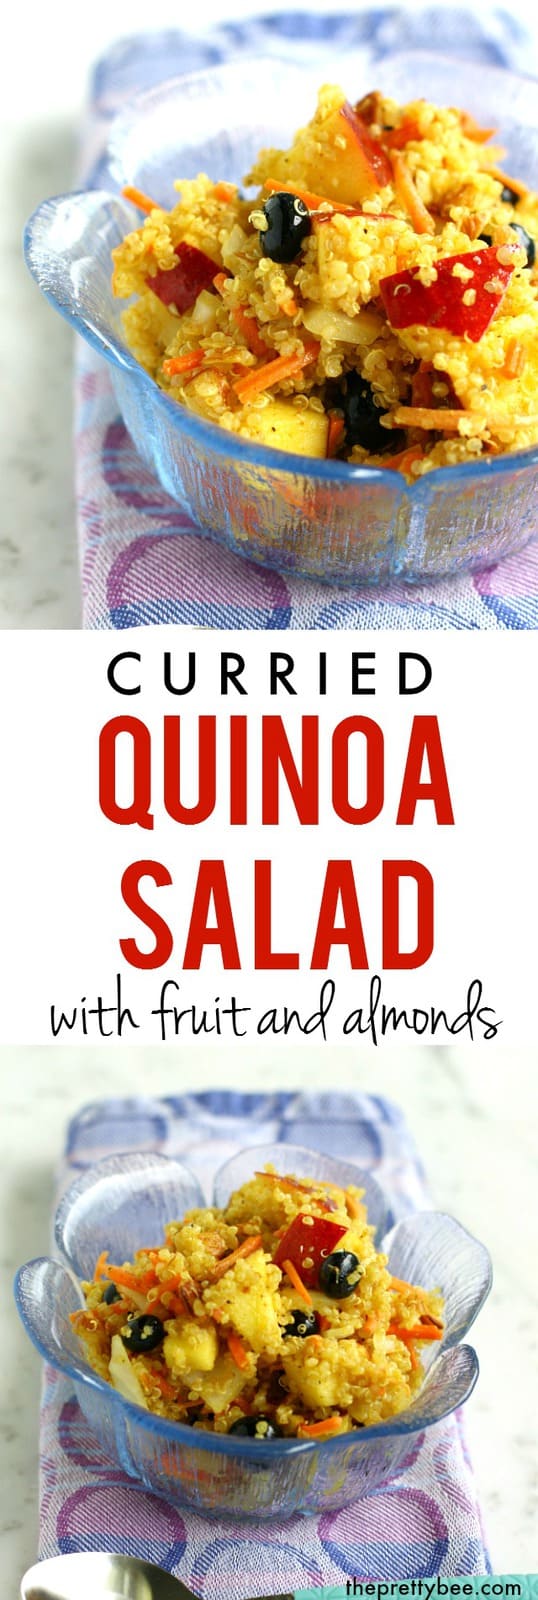  A fresh and flavorful curried quinoa salad that's both sweet and savory! This salad is perfect for a potluck.